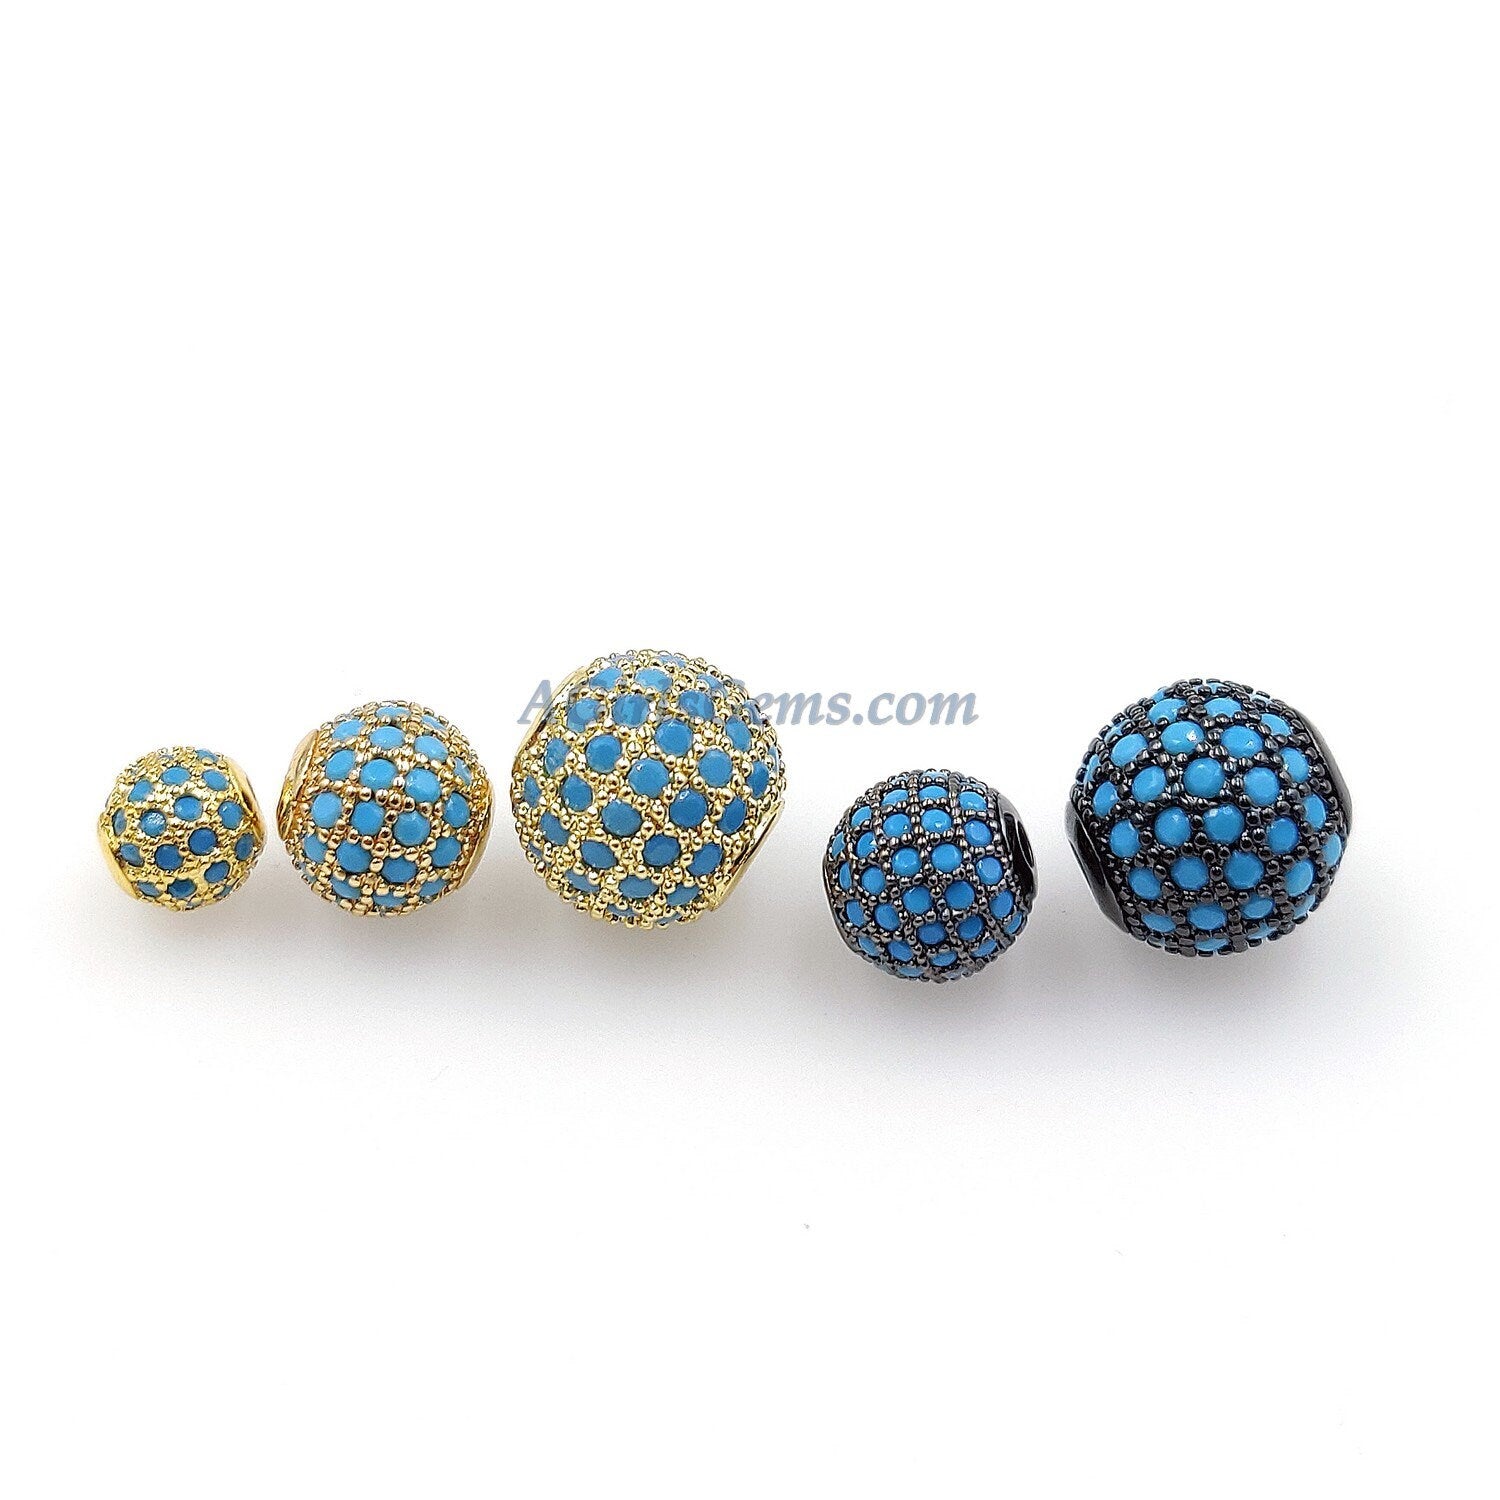 CZ Micro Pave Turquoise Pave Round Balls, 24 k Gold Plated 6 mm/8 mm/10 mm Stone Beads Blue Zircons Bracelet Crystal Focal Necklace Beads